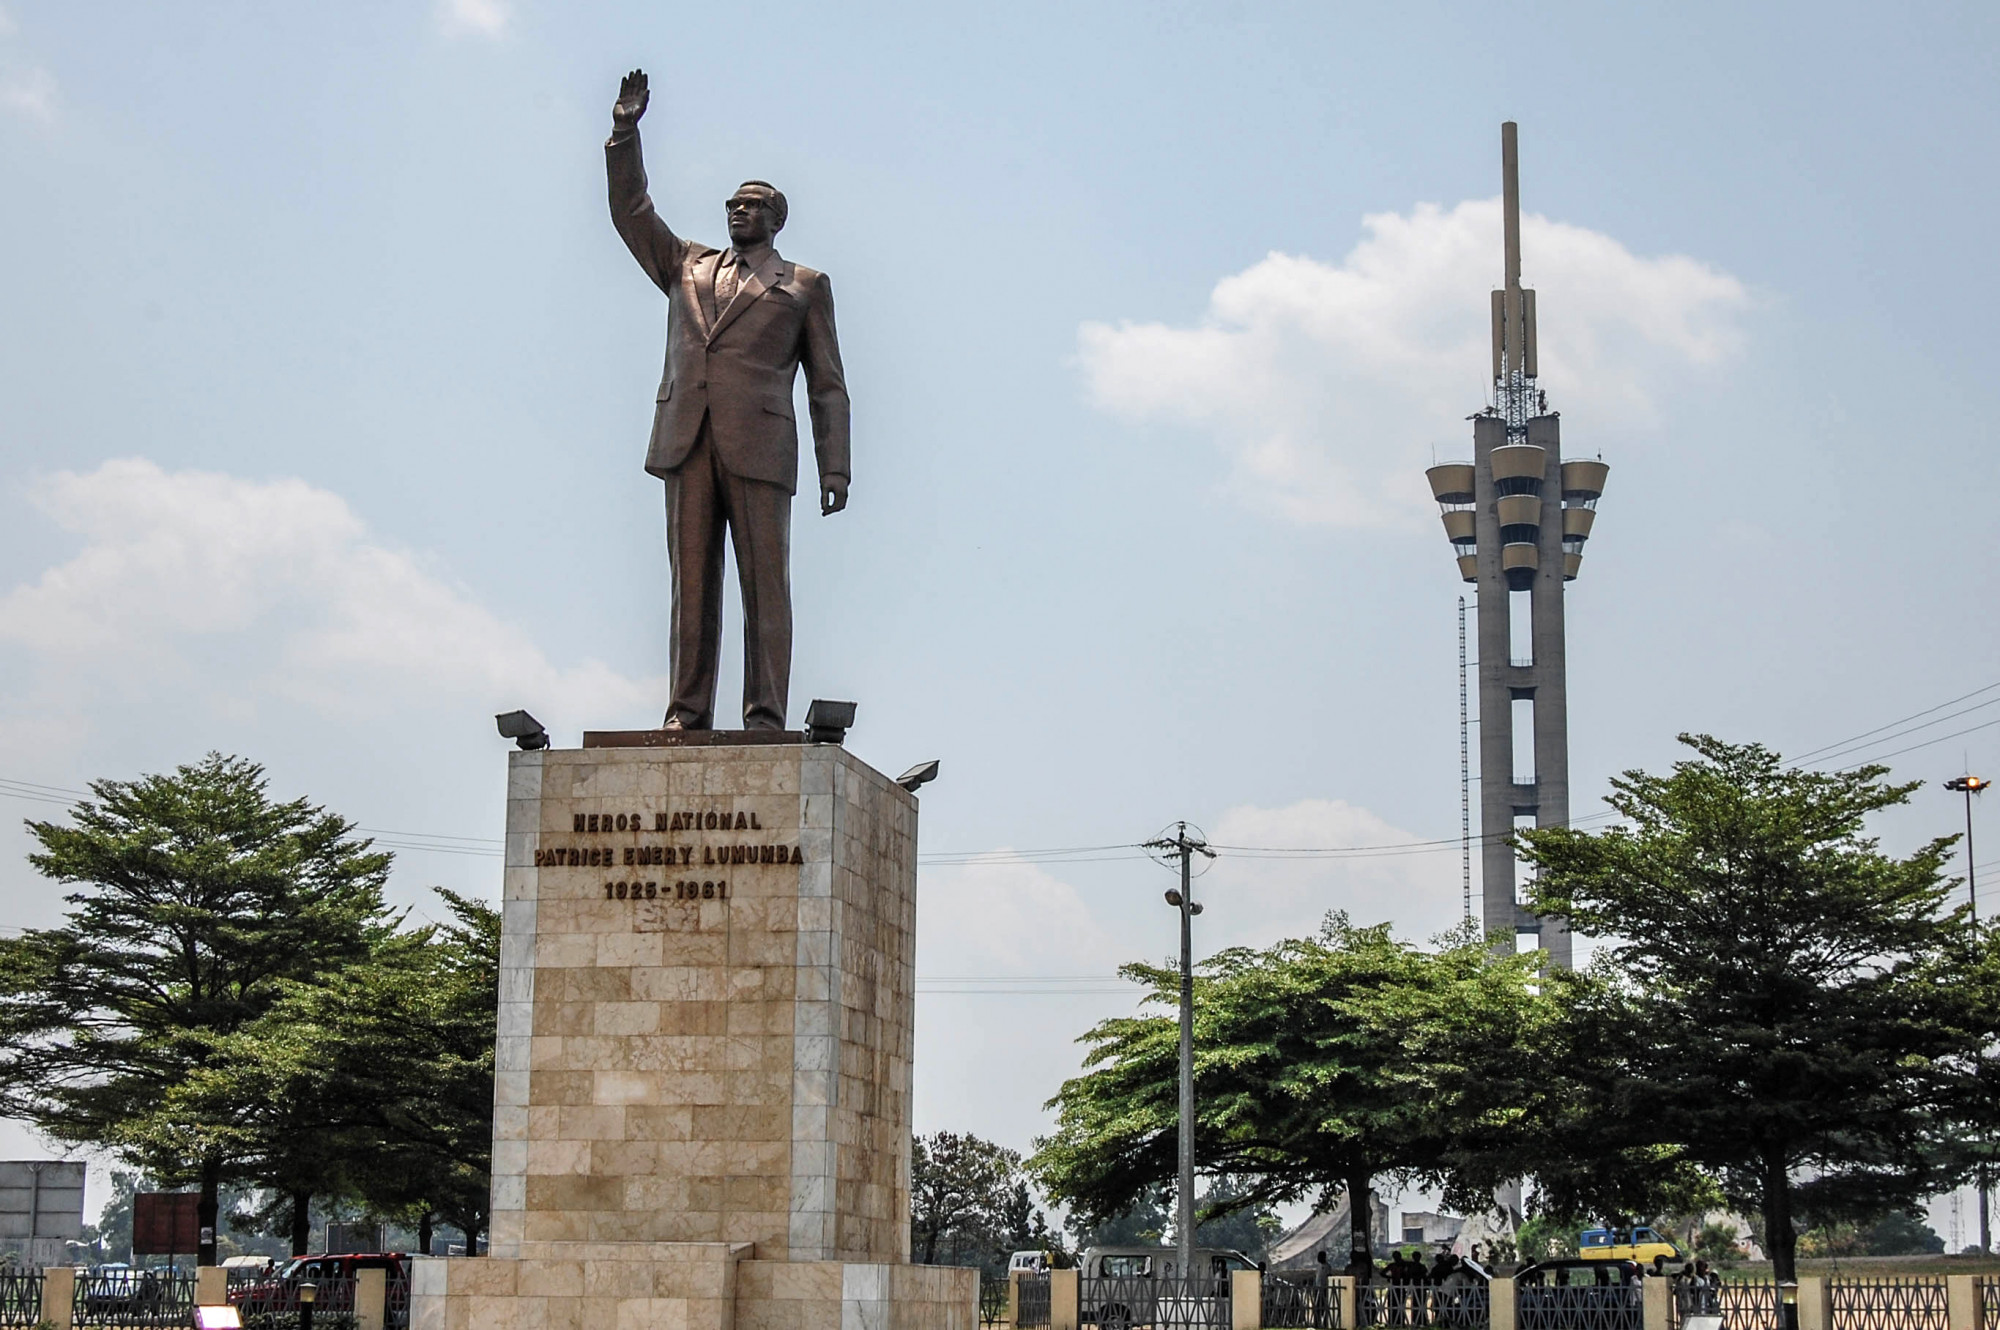 Kinshasa, Democratic Republic of Congo, 2010. The Tower of Limete, a 200-meter tall monument to Congolese independence leader Patrice Lumumba, and a statue of Lumumba, were erected in 1974 along the Lumumba Boulevard linking Kinshasa’s airport to the city center. © From the personal archives of Justin Makangara for Fondation Carmignac